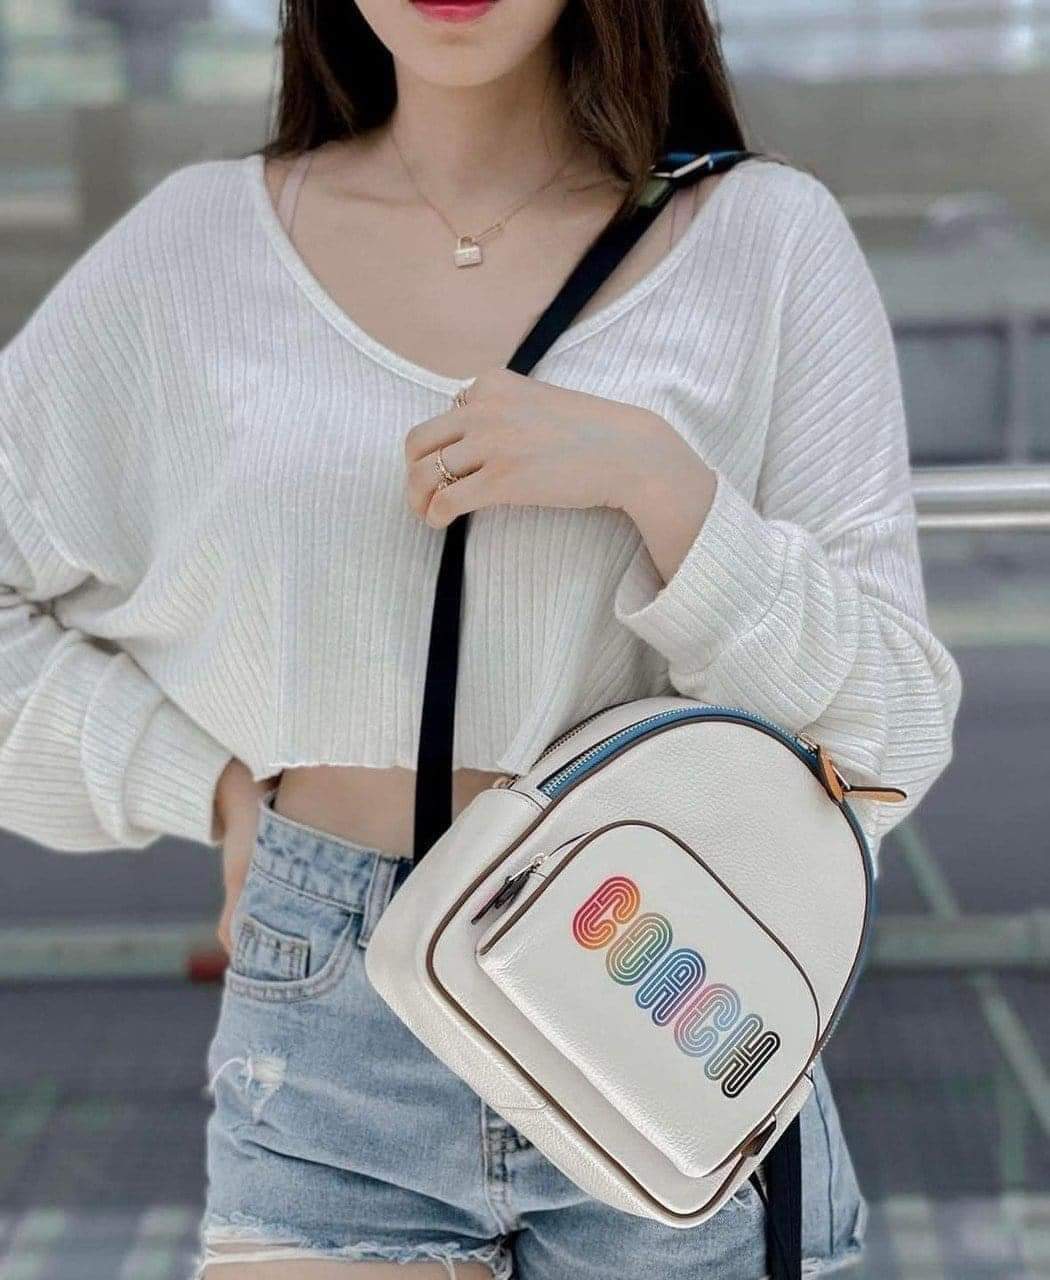 BALO HỌA TIẾT CẦU VỒNG NỮ COACH MINI COURT BACKPACK WITH RAINBOW 6